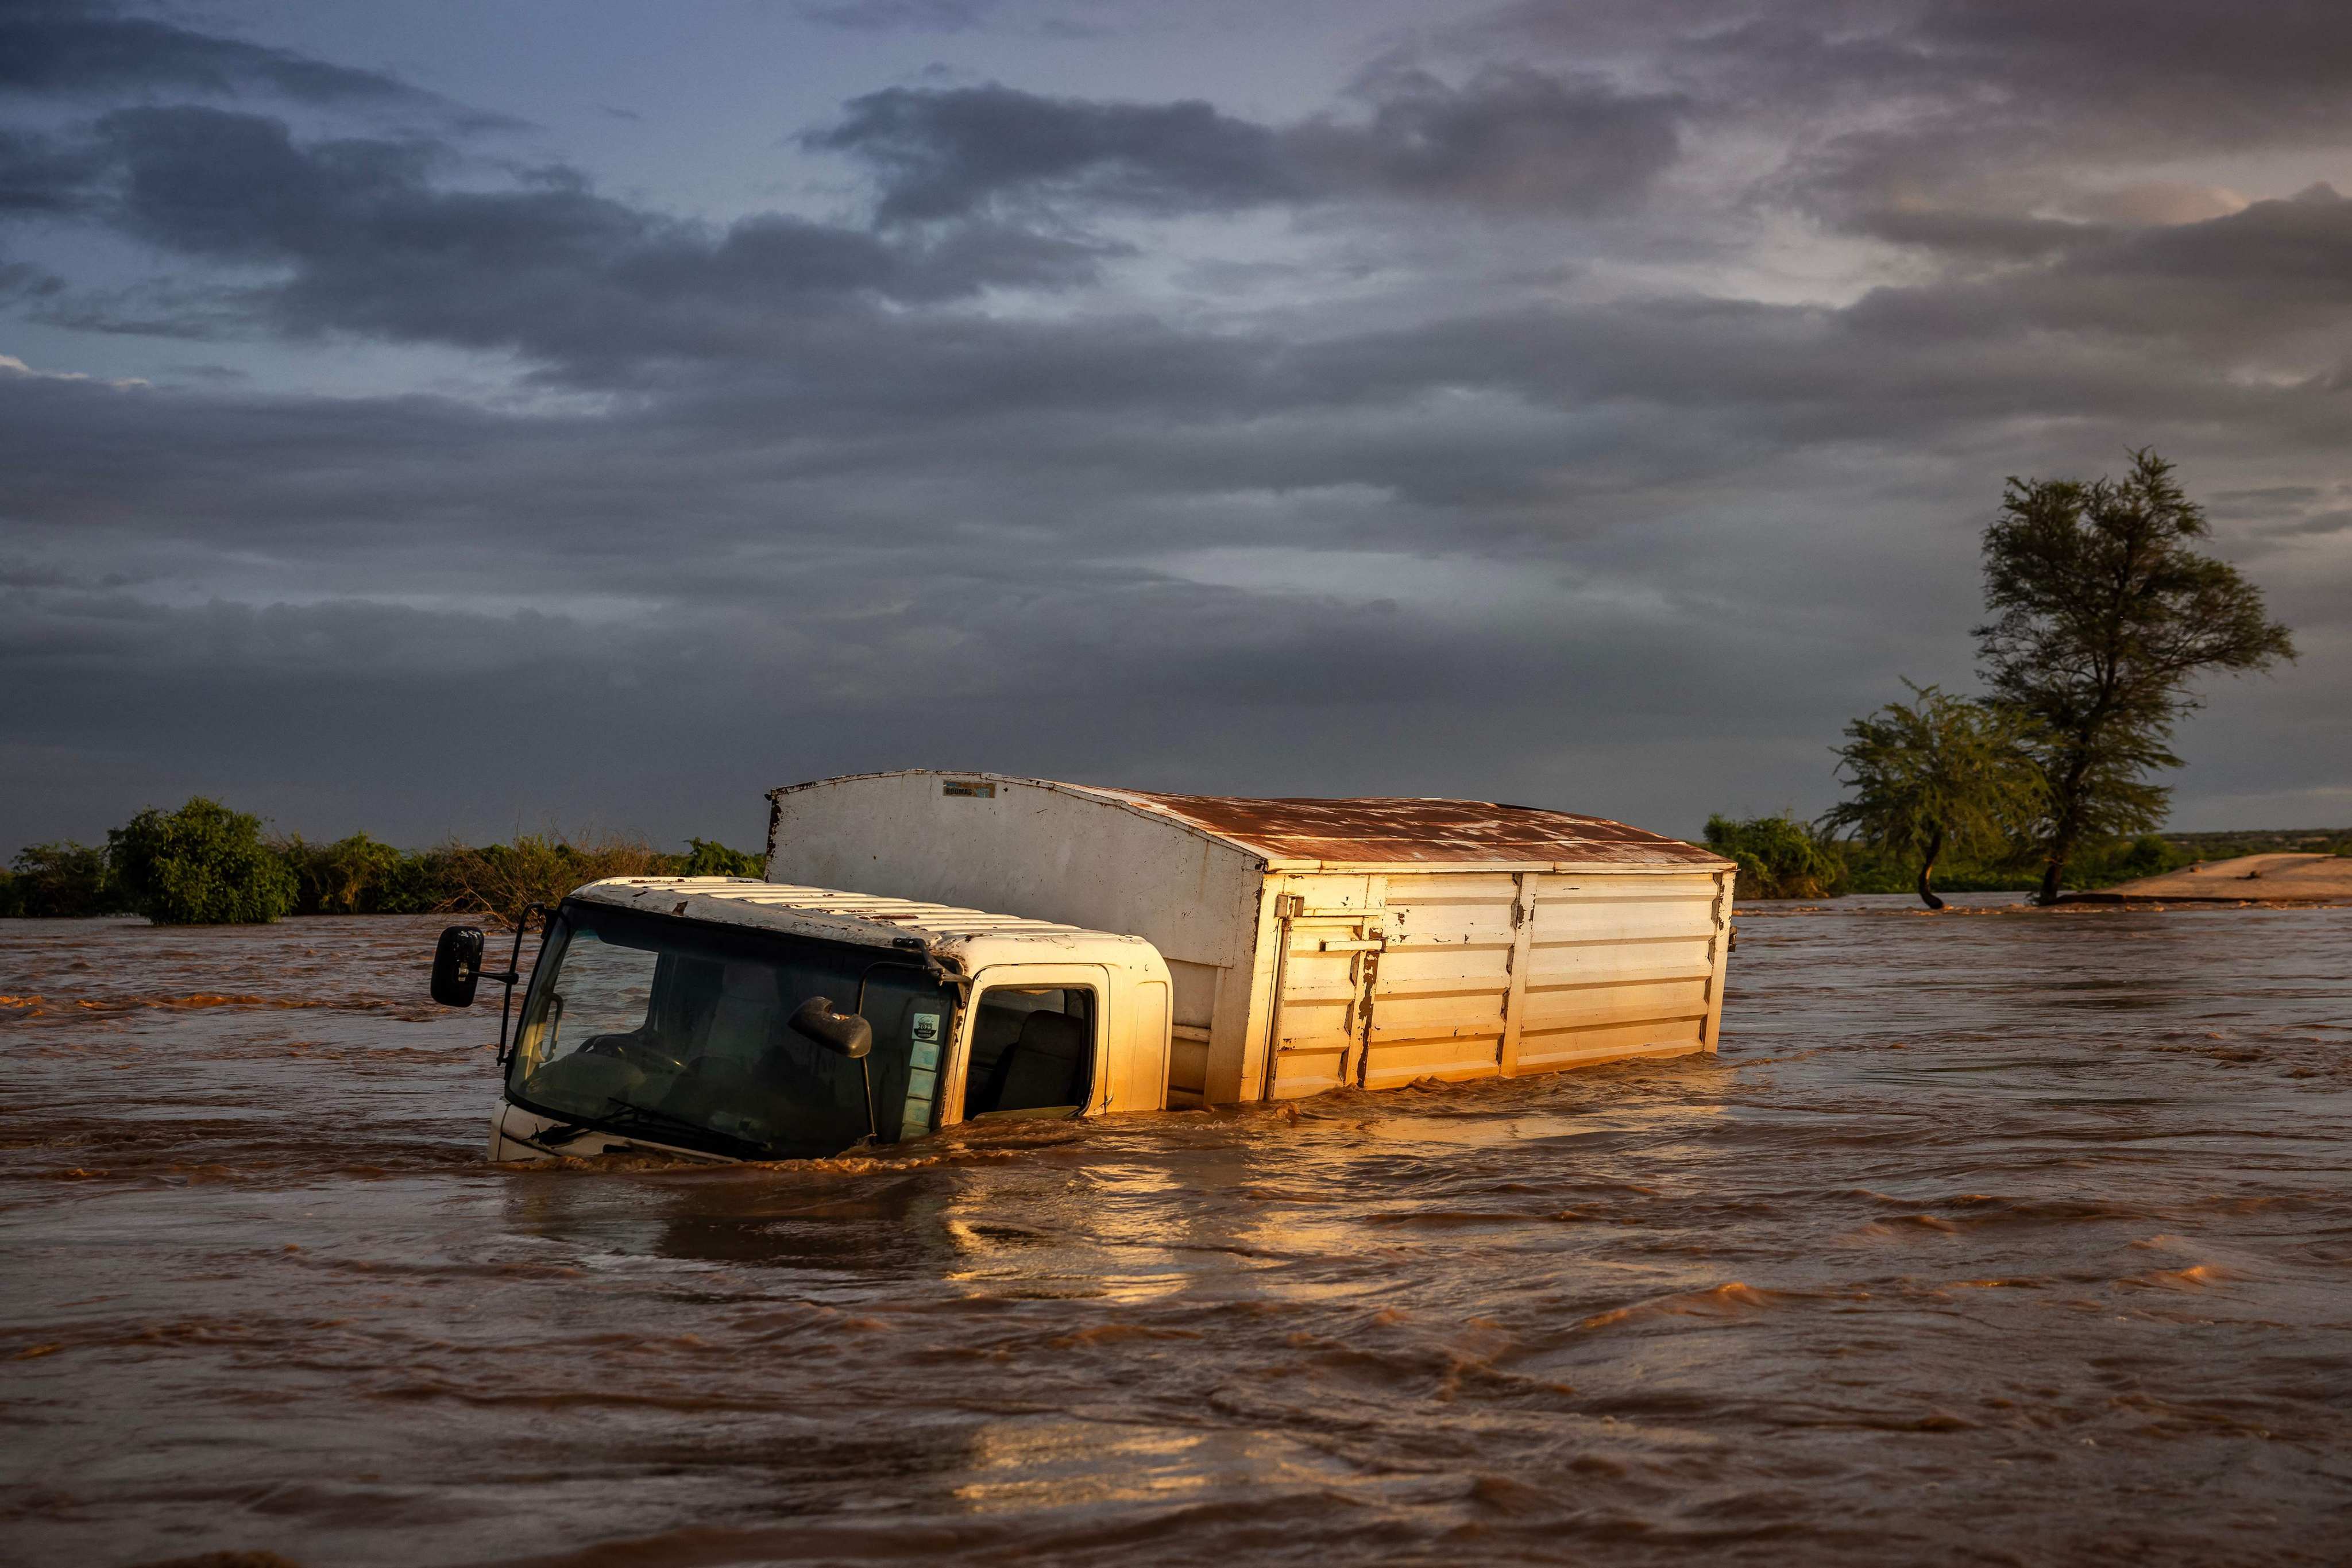 A truck sits submerged in flood waters following the destruction of a main road amid flash floods in Garissa, Kenya, on May 8. Kenya is grappling with one of its worst floods in recent history, the latest in a string of weather catastrophes, following weeks of extreme rainfall scientists have linked to a changing climate. Photo: AFP